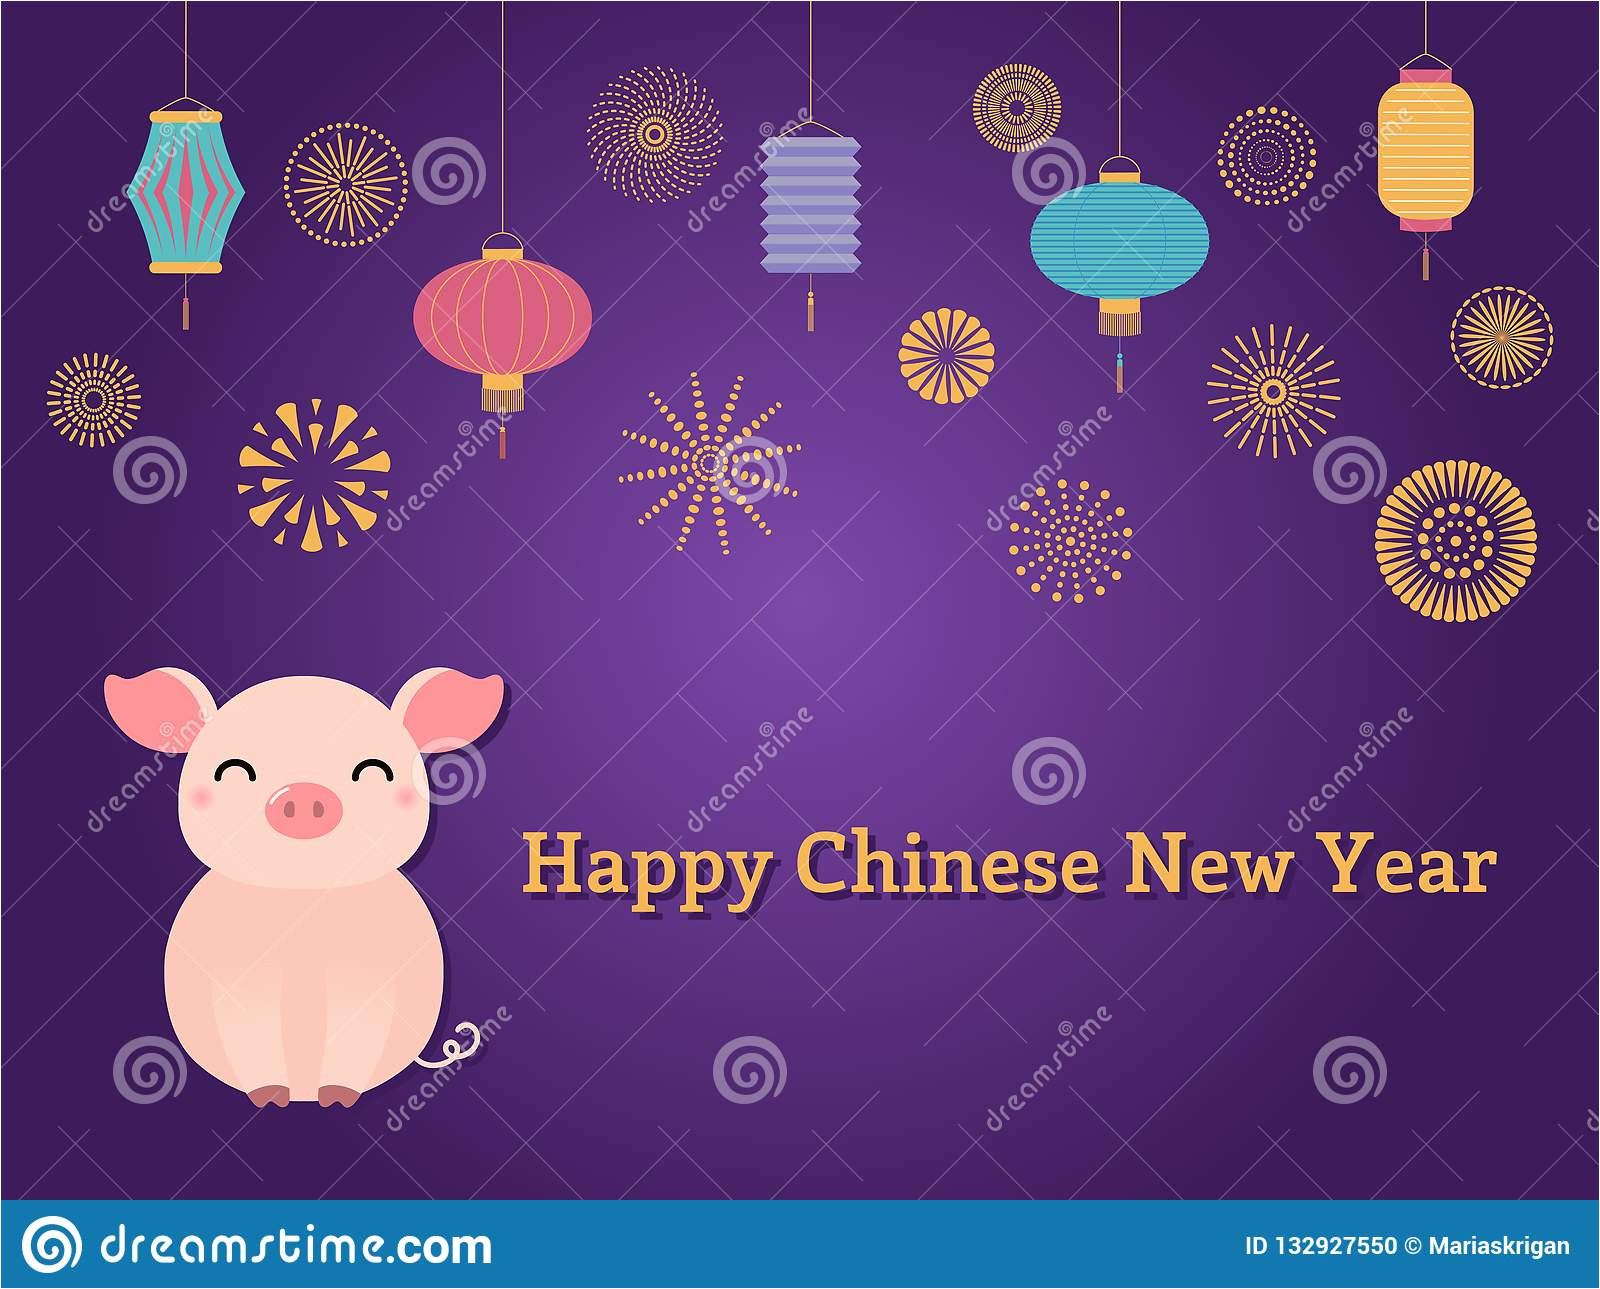 chinese new year greeting card cute pig lanterns fireworks typography vector illustration flat style design concept 132927550 jpg